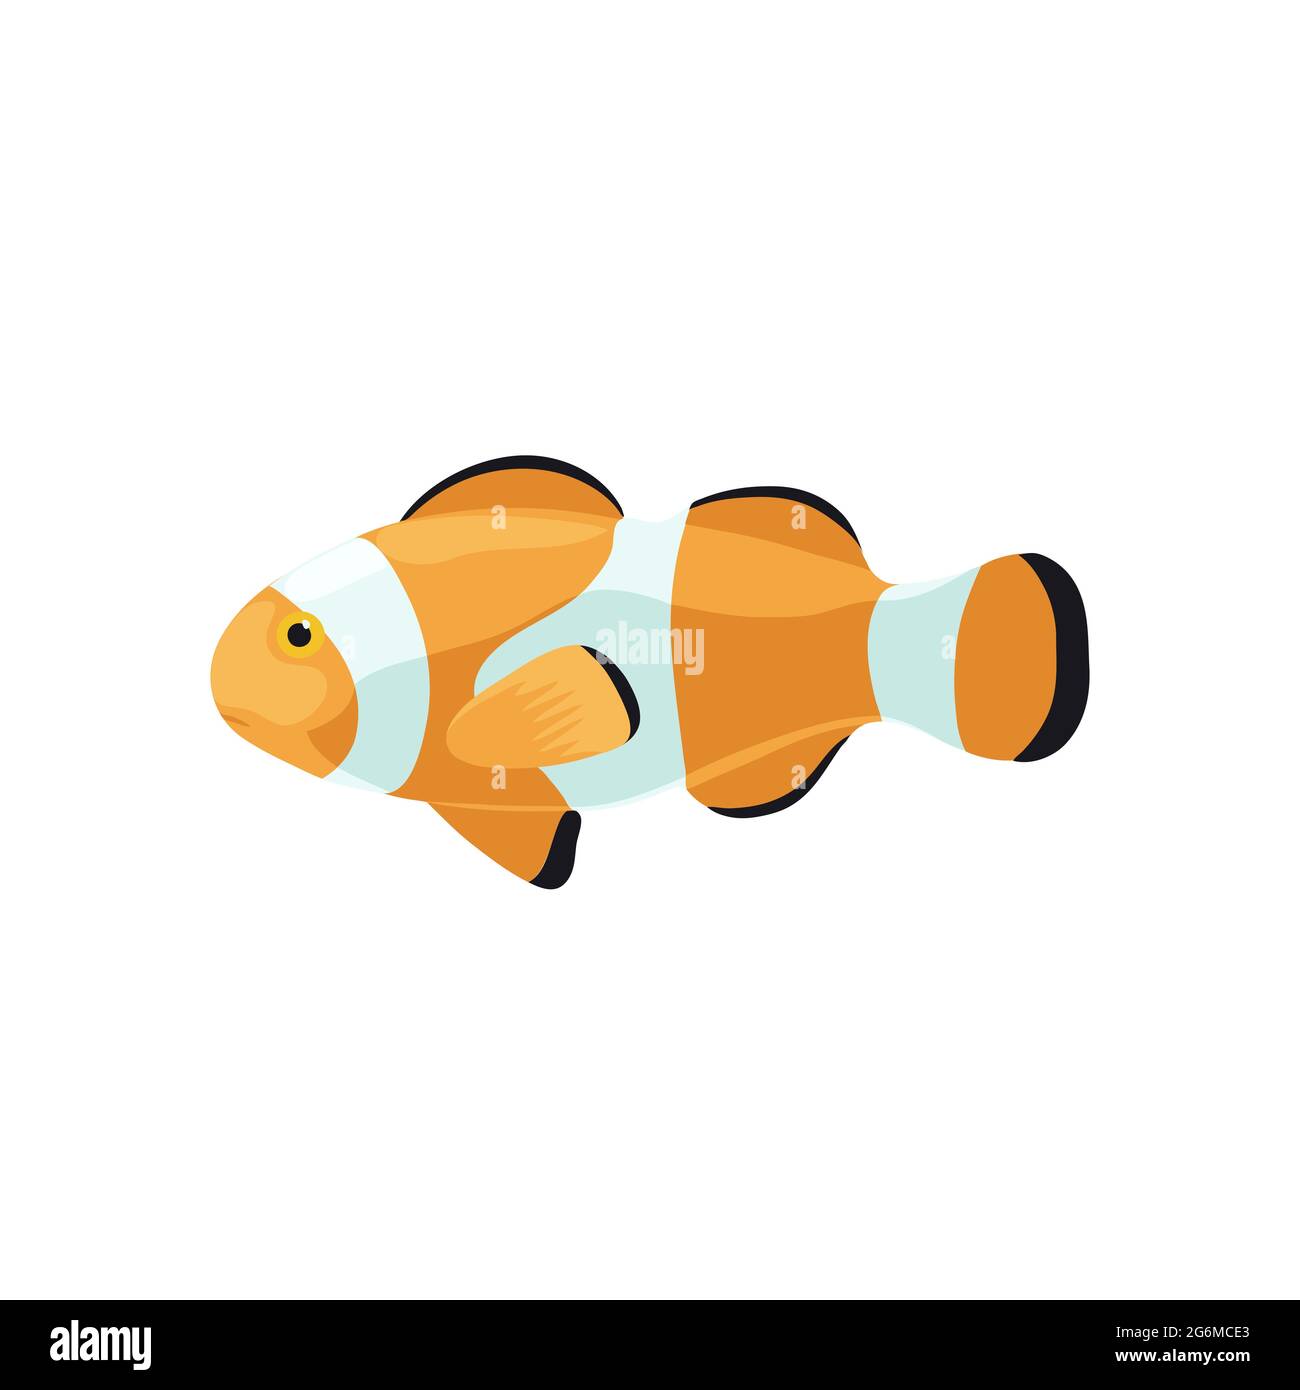 Cartoon illustrations of clown fish isolated on white background. Stock Vector